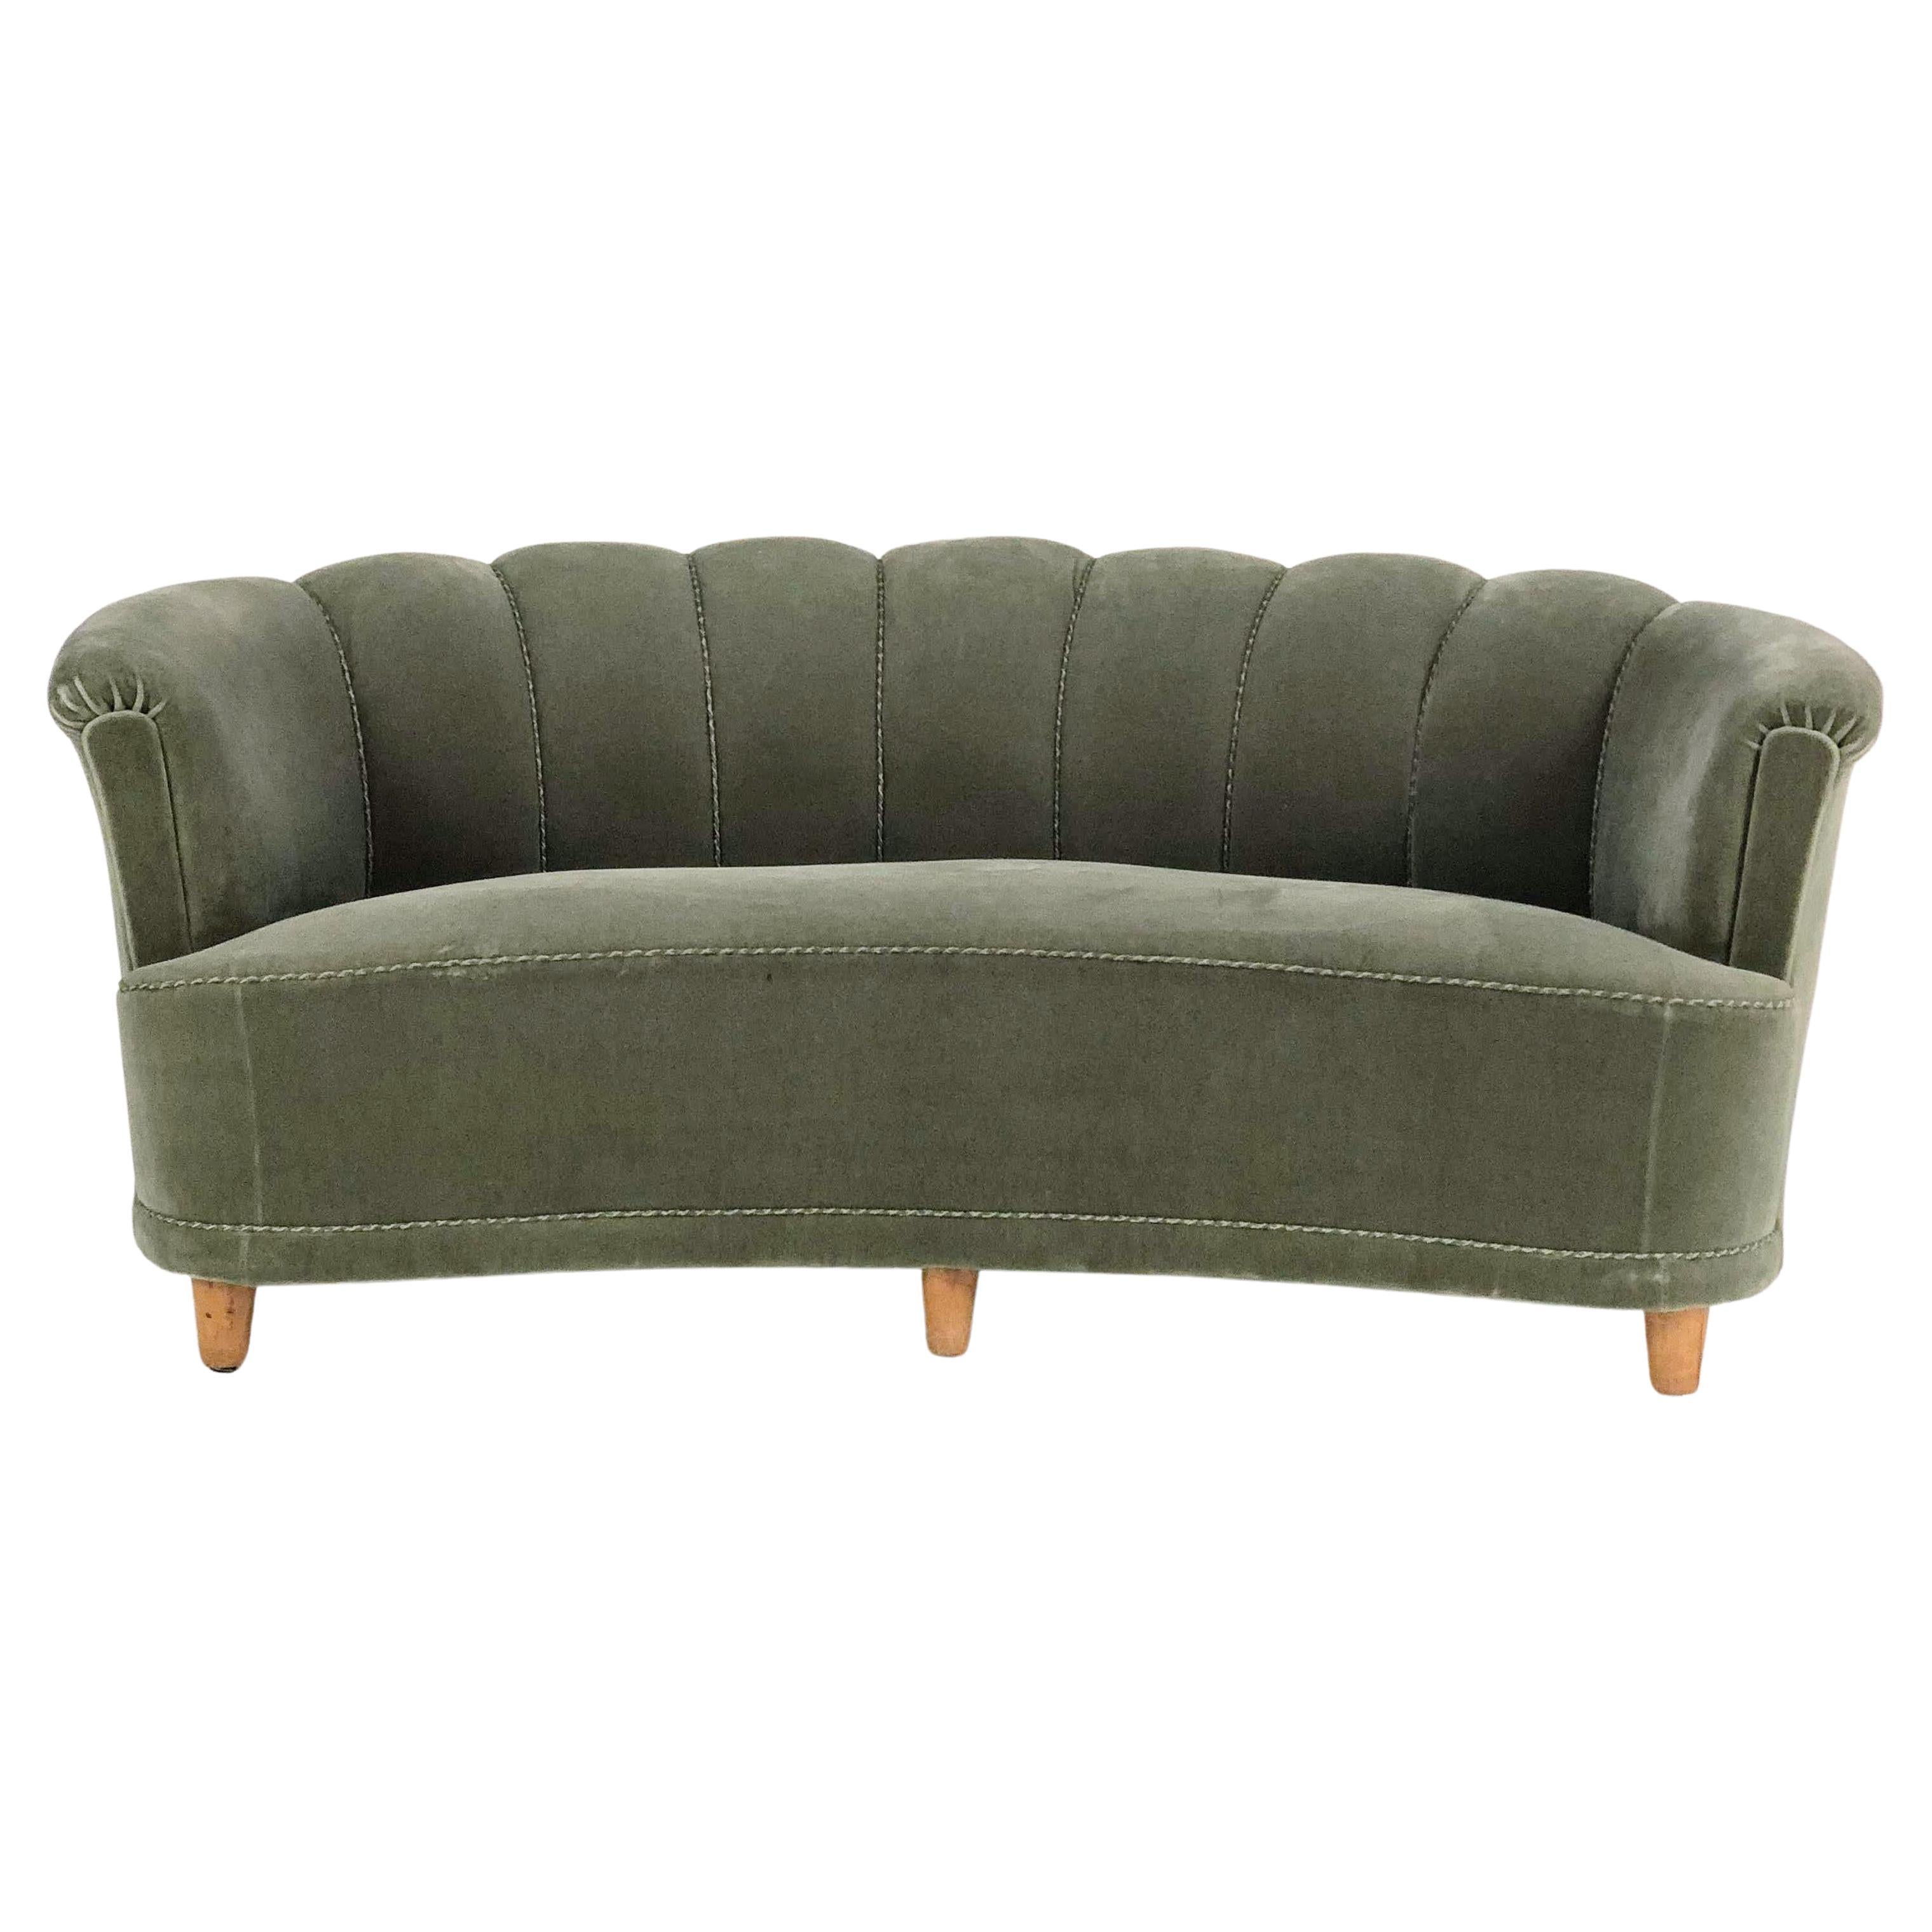 A mid-century Swedish sofa. Upholstered in an interesting green gray velour with scalloped back, piping detail on the outer edges, and 6 wooden feet. 

A pair of matching lounge chairs are also available.